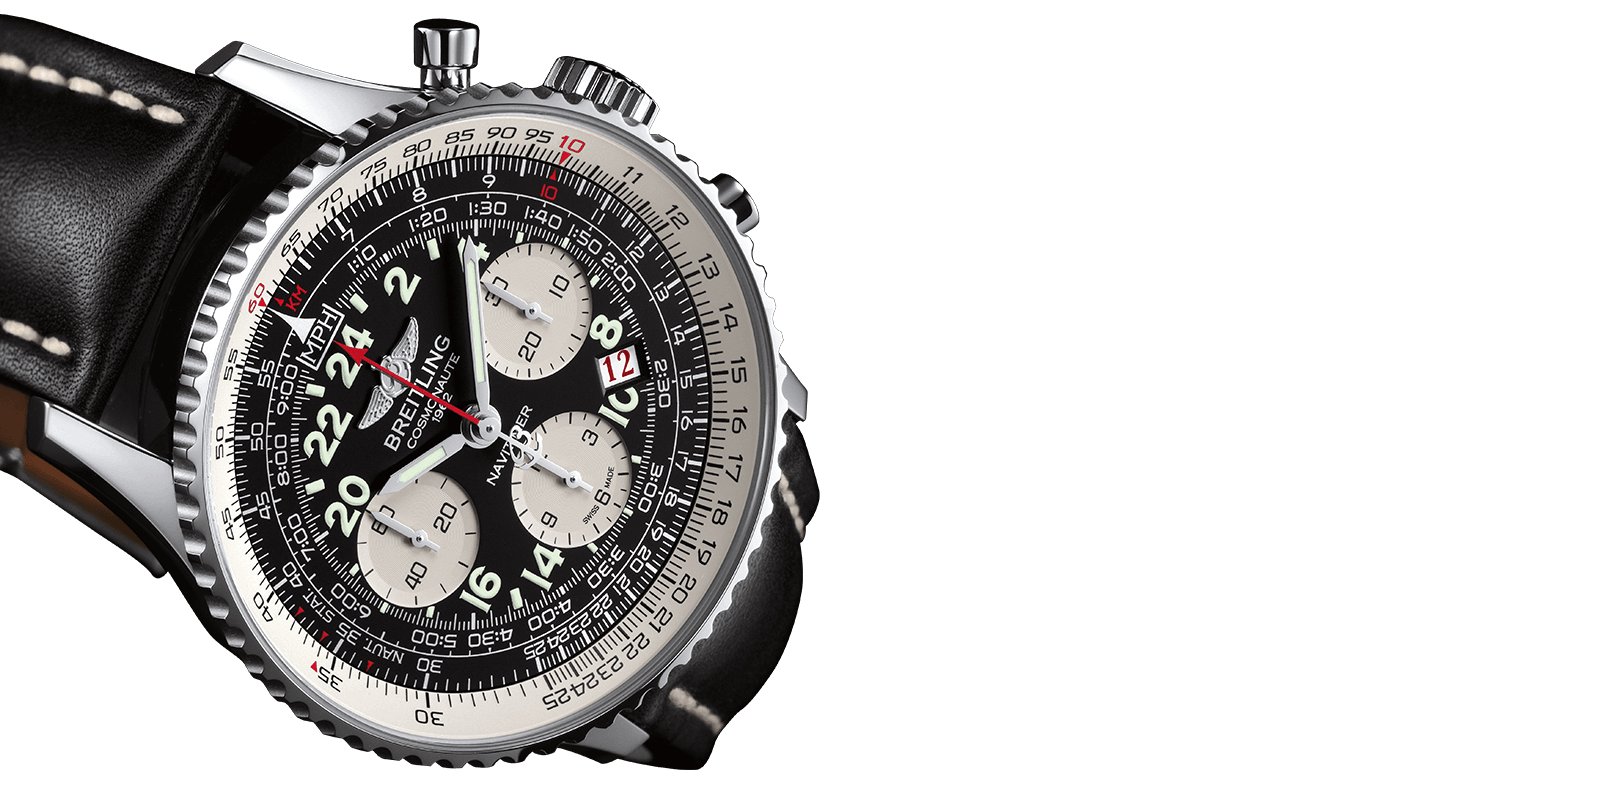 Breitling Endurance pro in stockbreitling Endurance Pro Ironman Bright Light Red 44 mm X823109a1k1s1s1